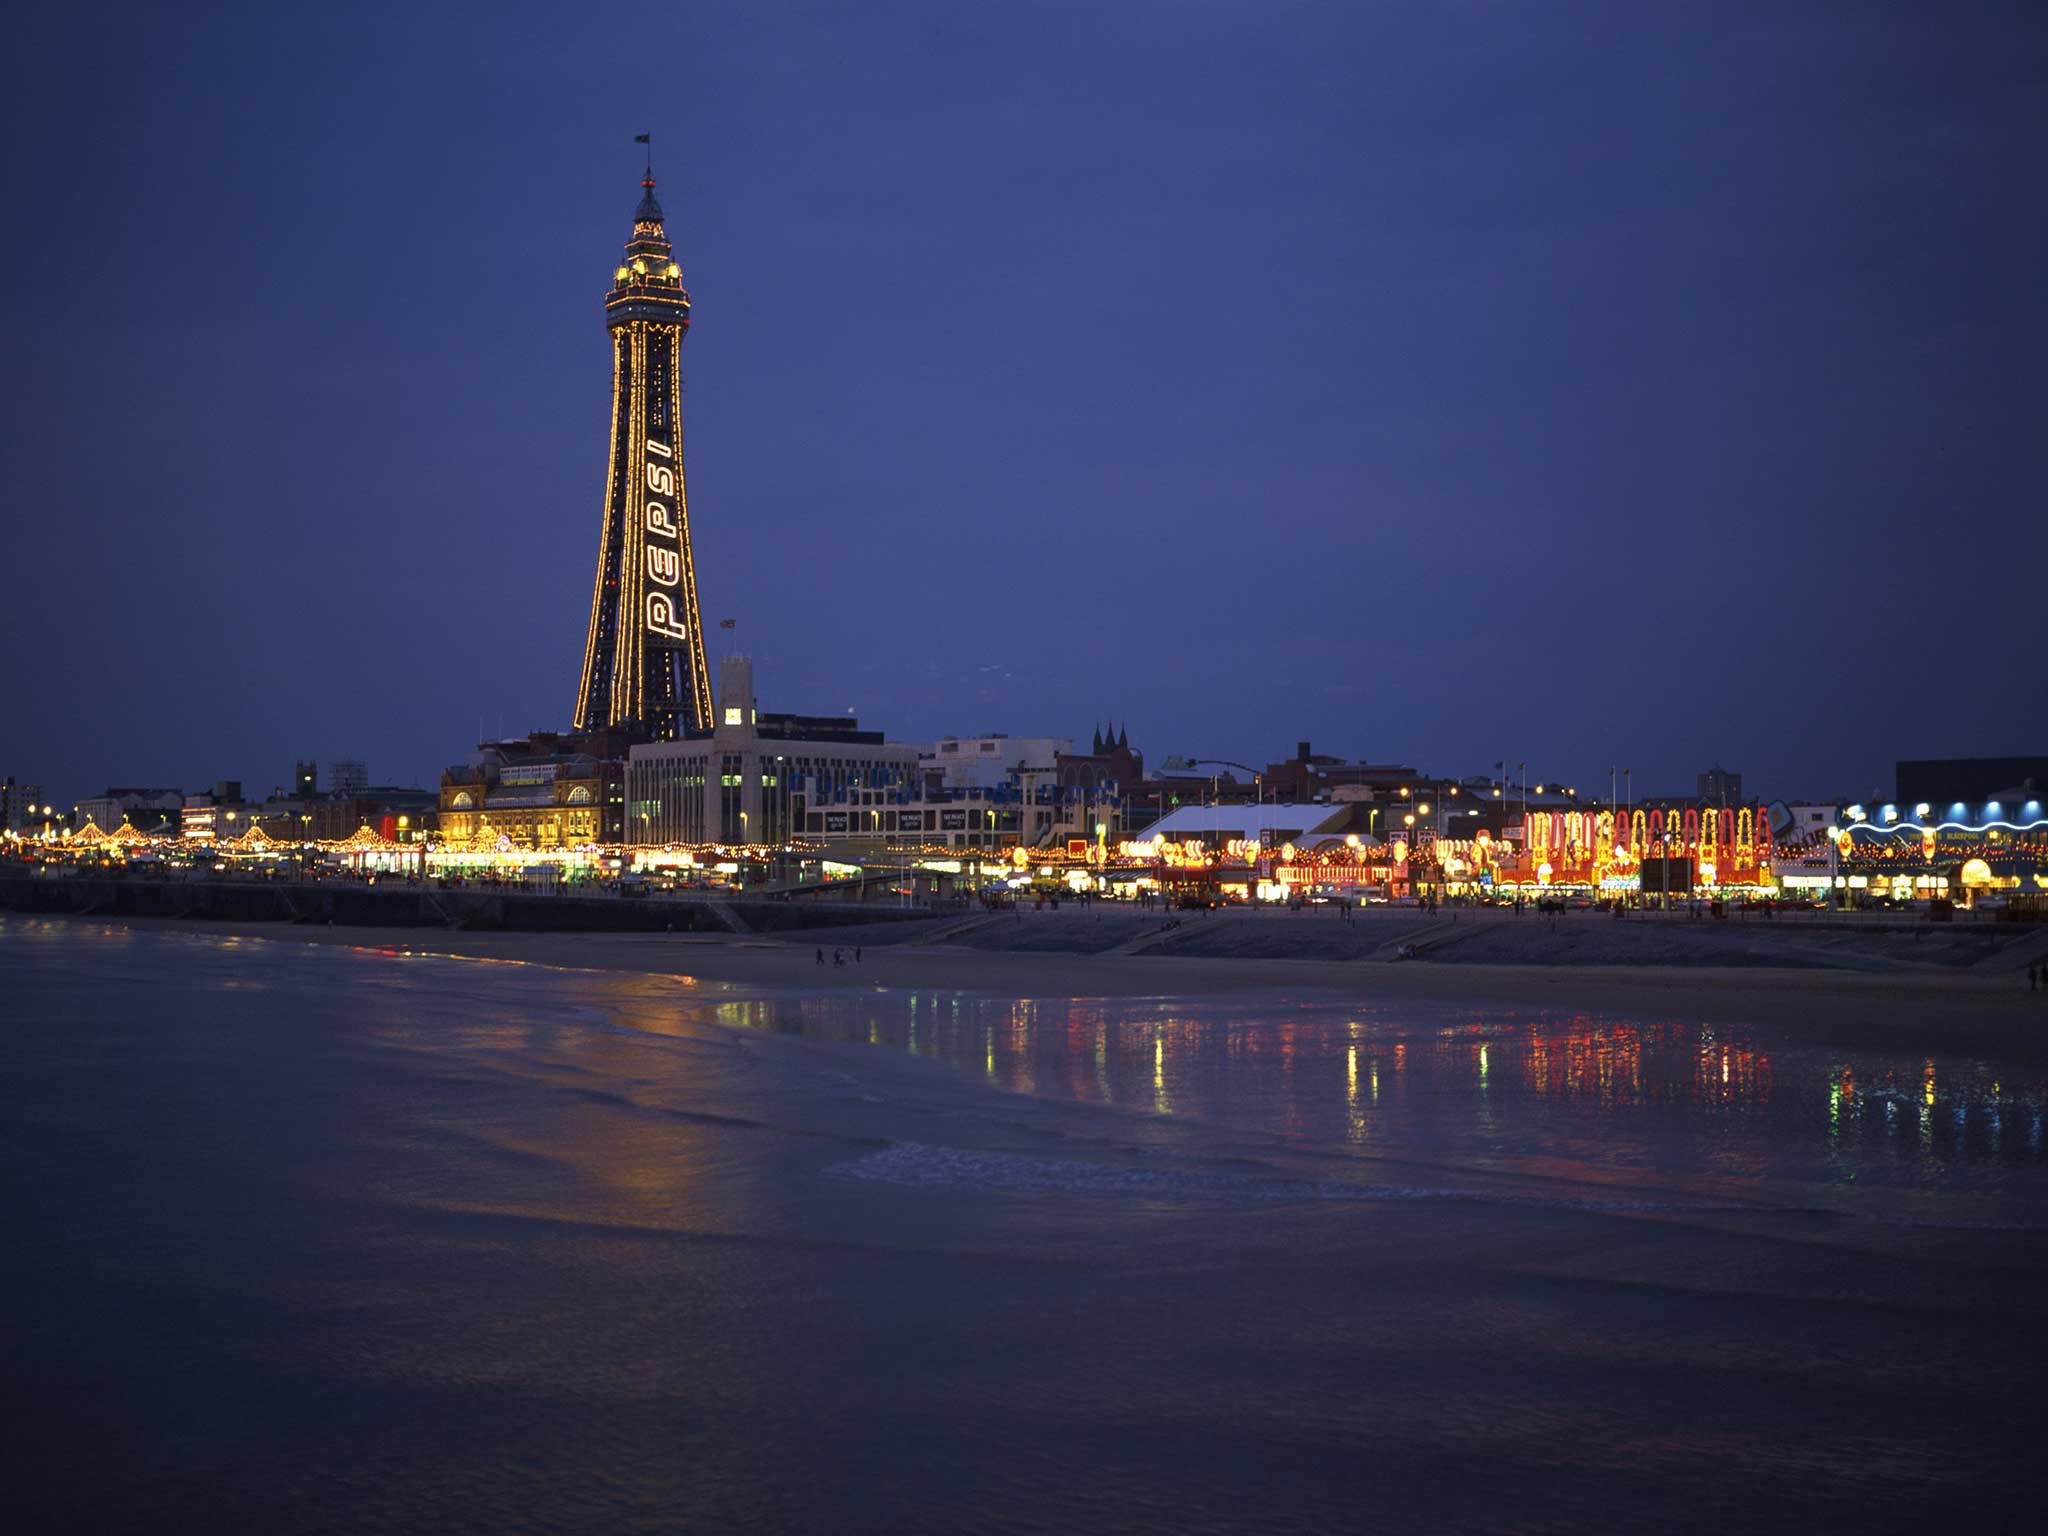 Blackpool is known for being popular with hen and stag parties